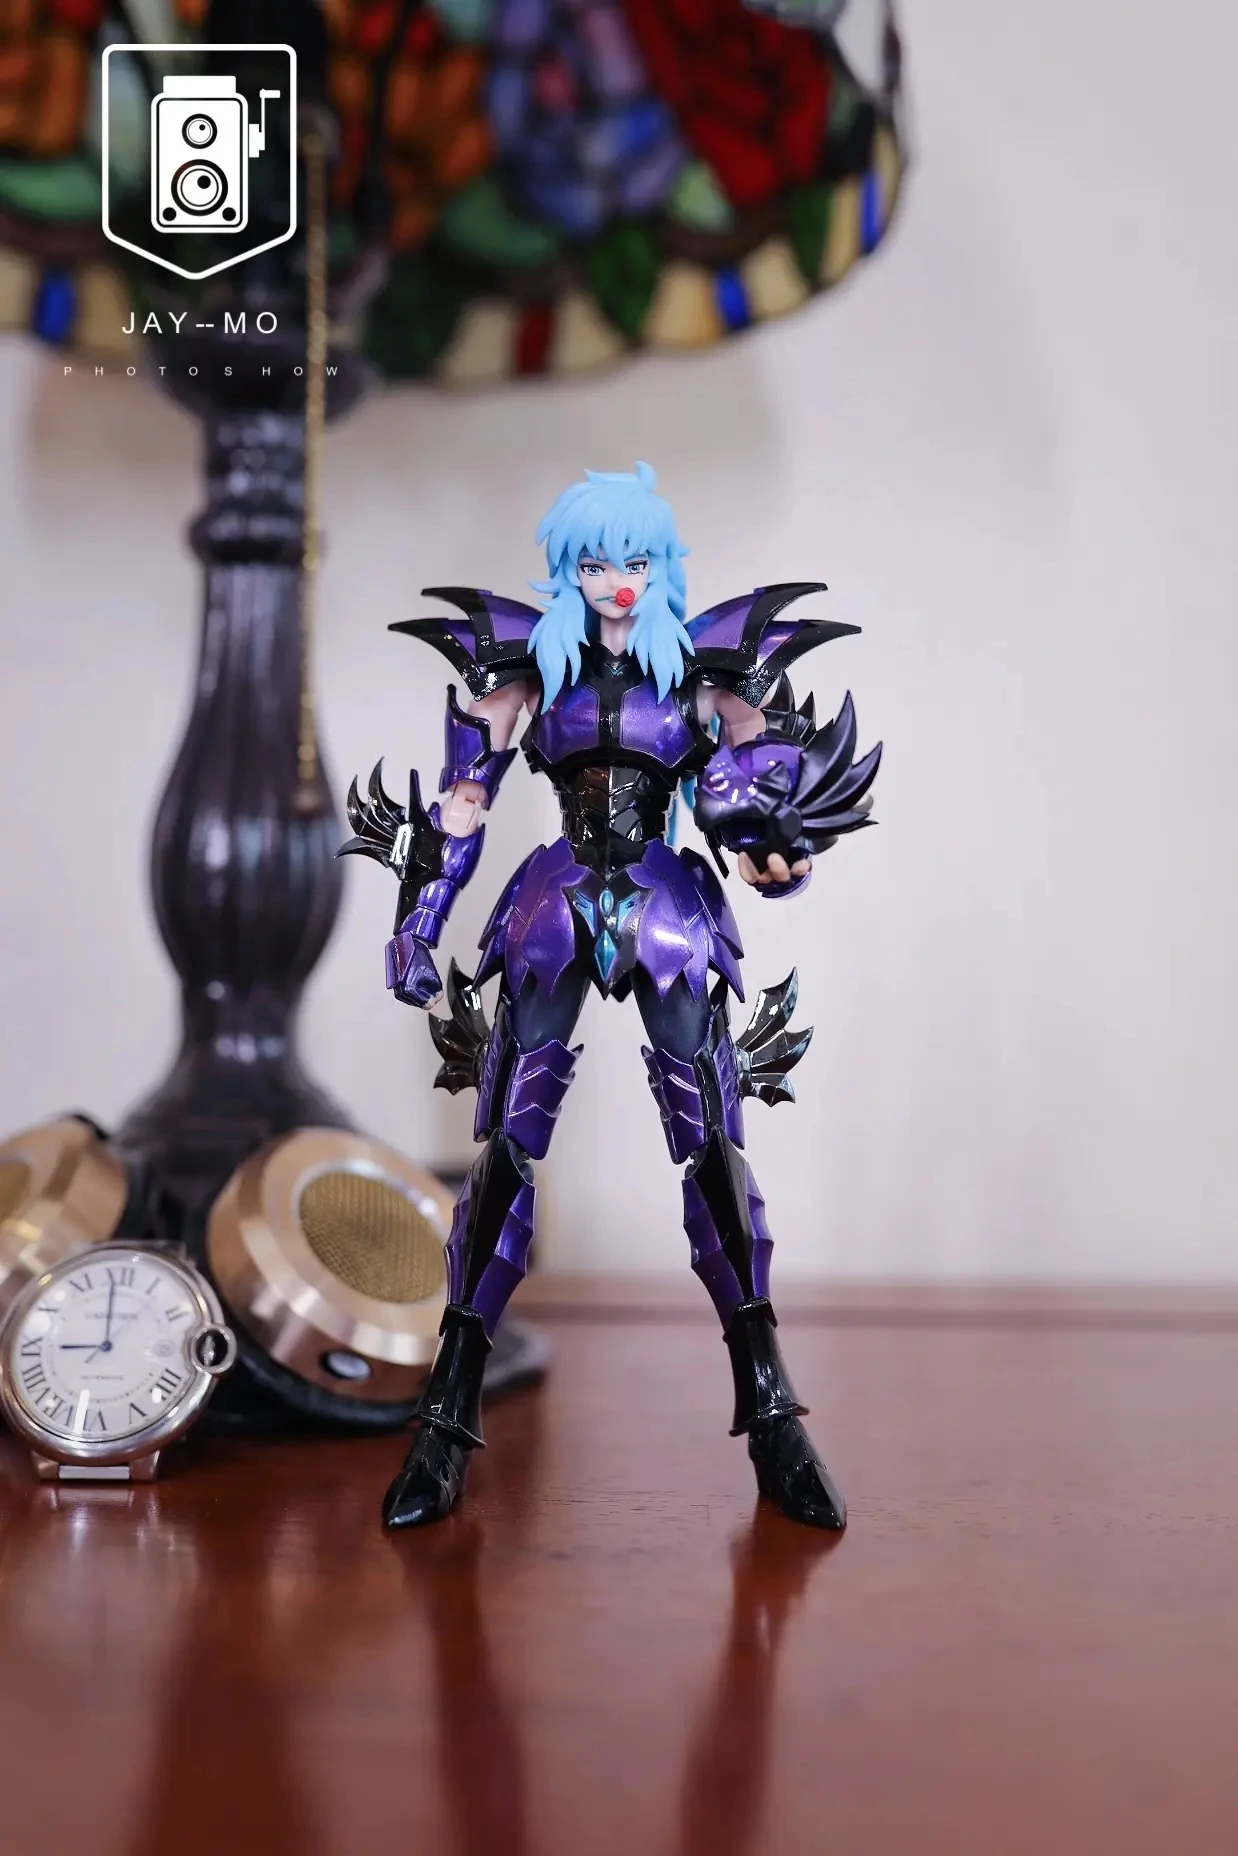 

IN-STOCK JModel Saint Seiya Hades Specters Pisces Aphrodite EX Gold Saint Action Figure Metal Armor Model Toys